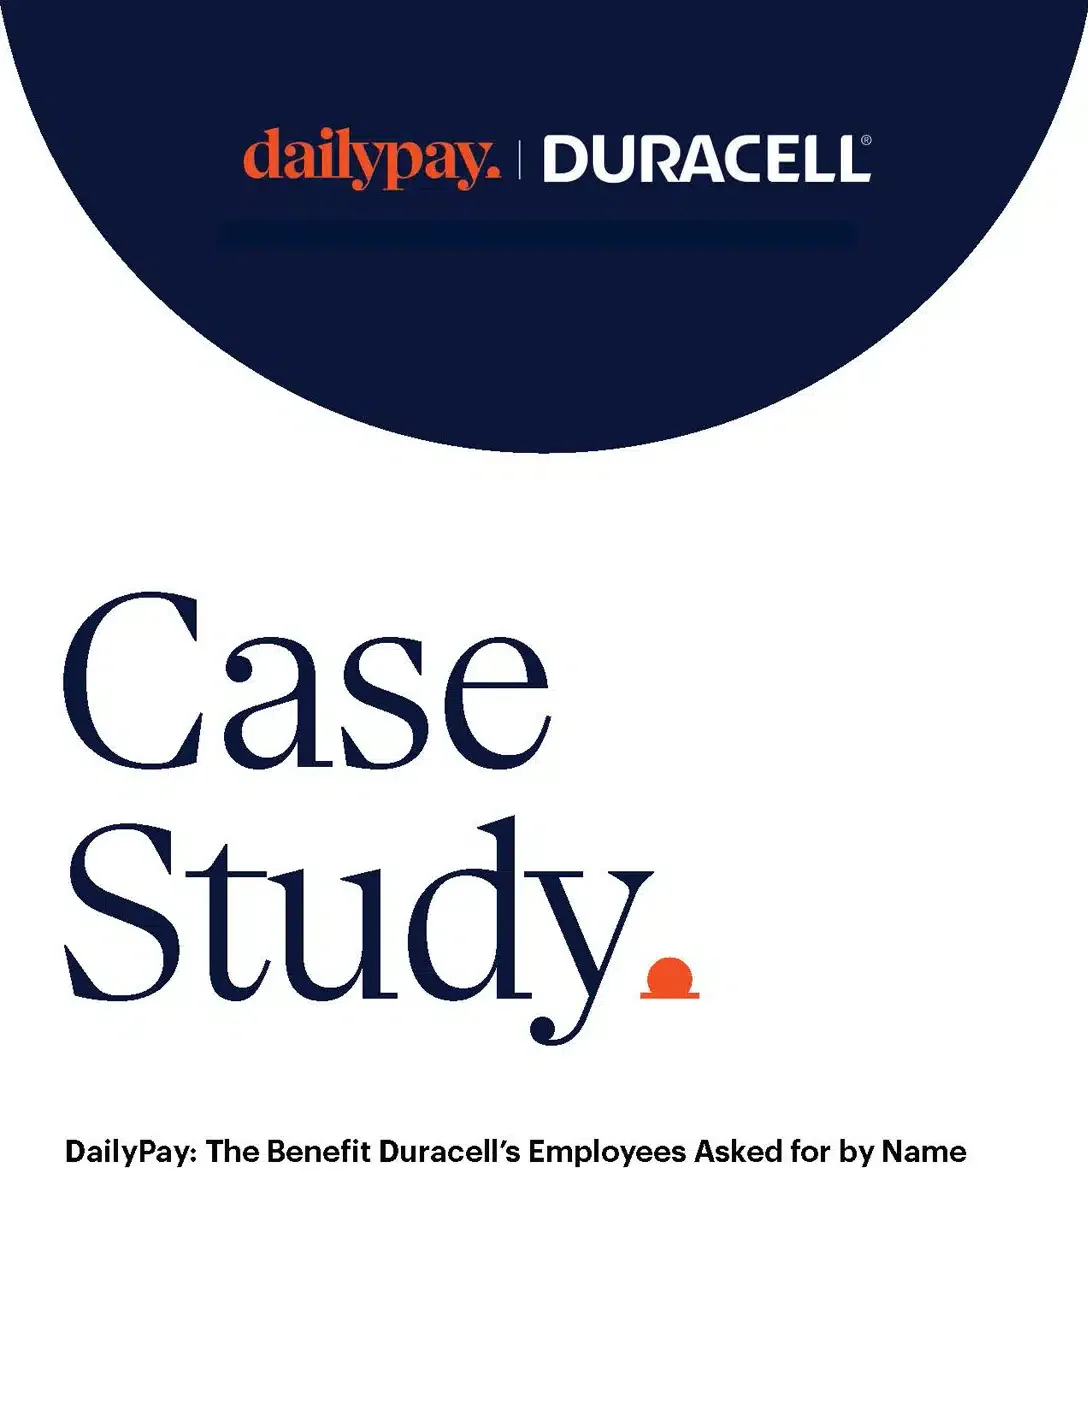 Cover page of a case study by DailyPay and Duracell, with the title "Case Study" and subtitle "DailyPay: The Benefit Duracell's Employees Asked for by Name.